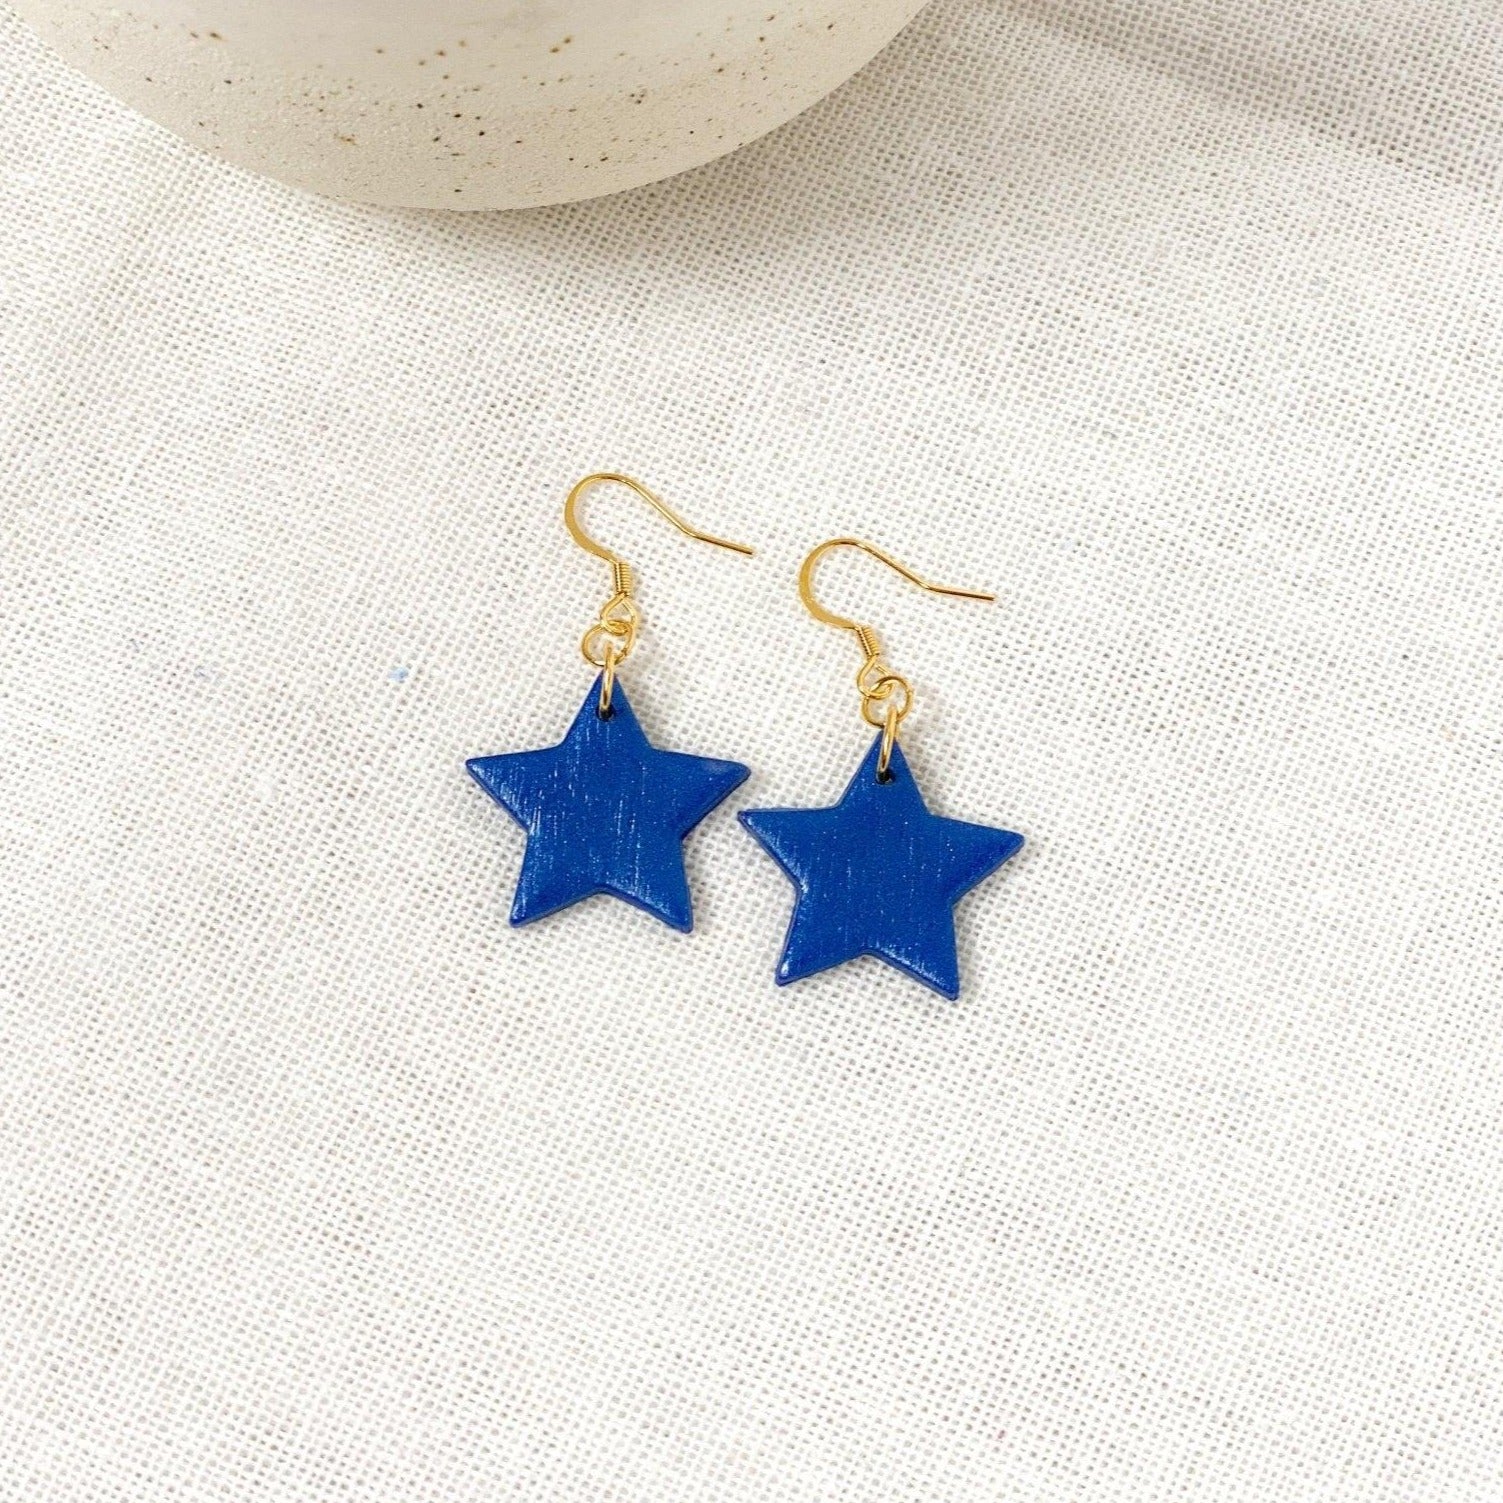 Blue Star Earrings - Clay Earrings - Unique Holiday Gifts - Christmas Gifts for Her - Surgical Steel - Gold Earrings - Handmade Jewelry - Harbor to Gulf Co.